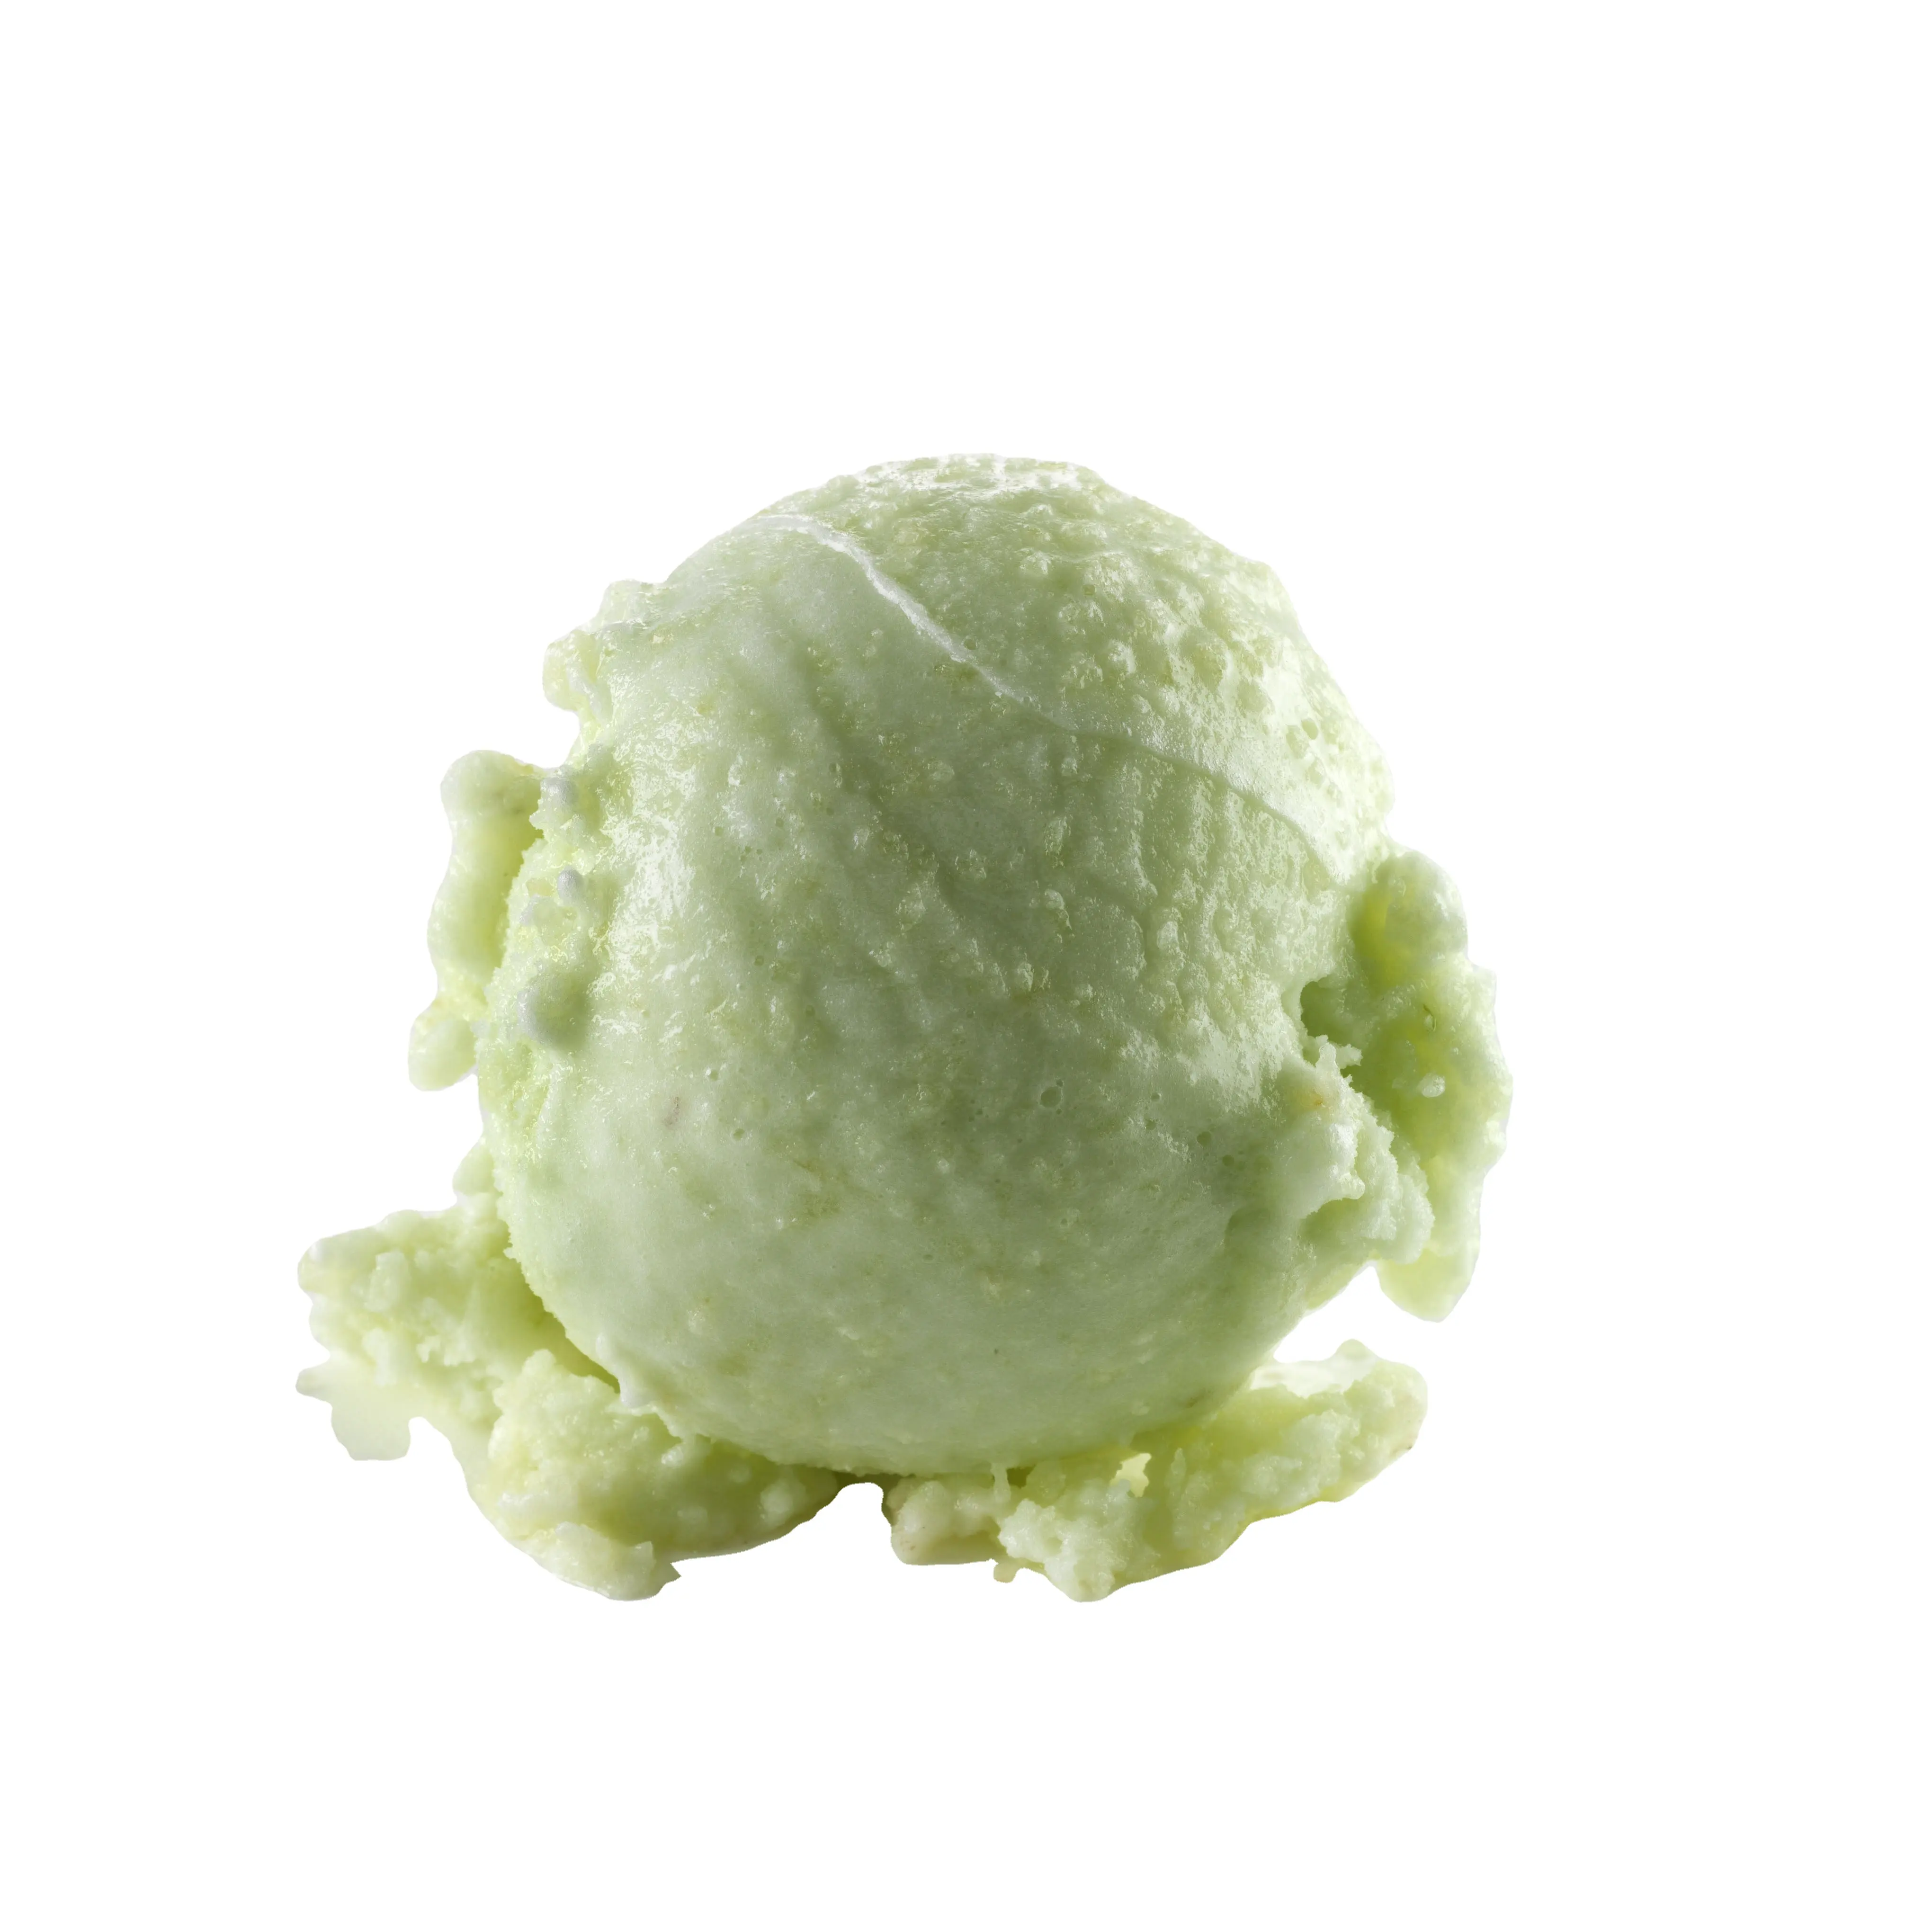 Green Apple Ice cream - Sorbet - Made in Italy - 2.5Lt tub - for HORECA - suitable for vegan - ready to serve